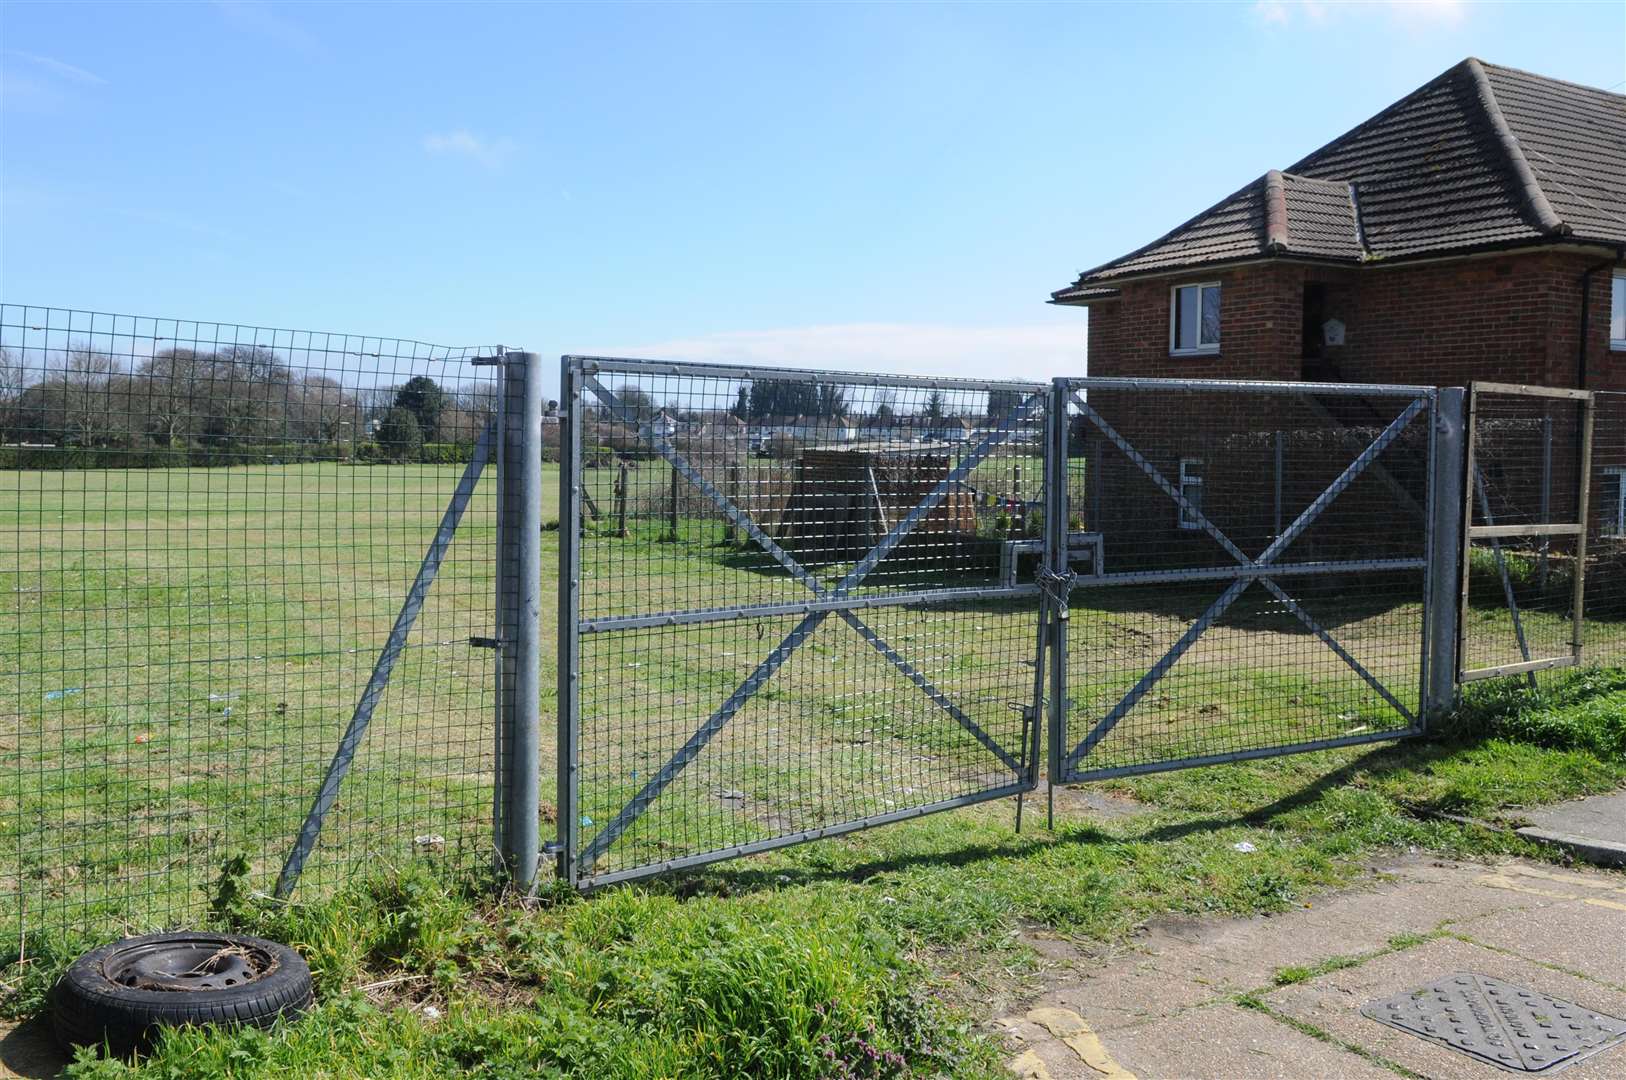 plans have been drawn up to build 91 homes at the former South Deal Playing Fields, Freemen's Way, Deal